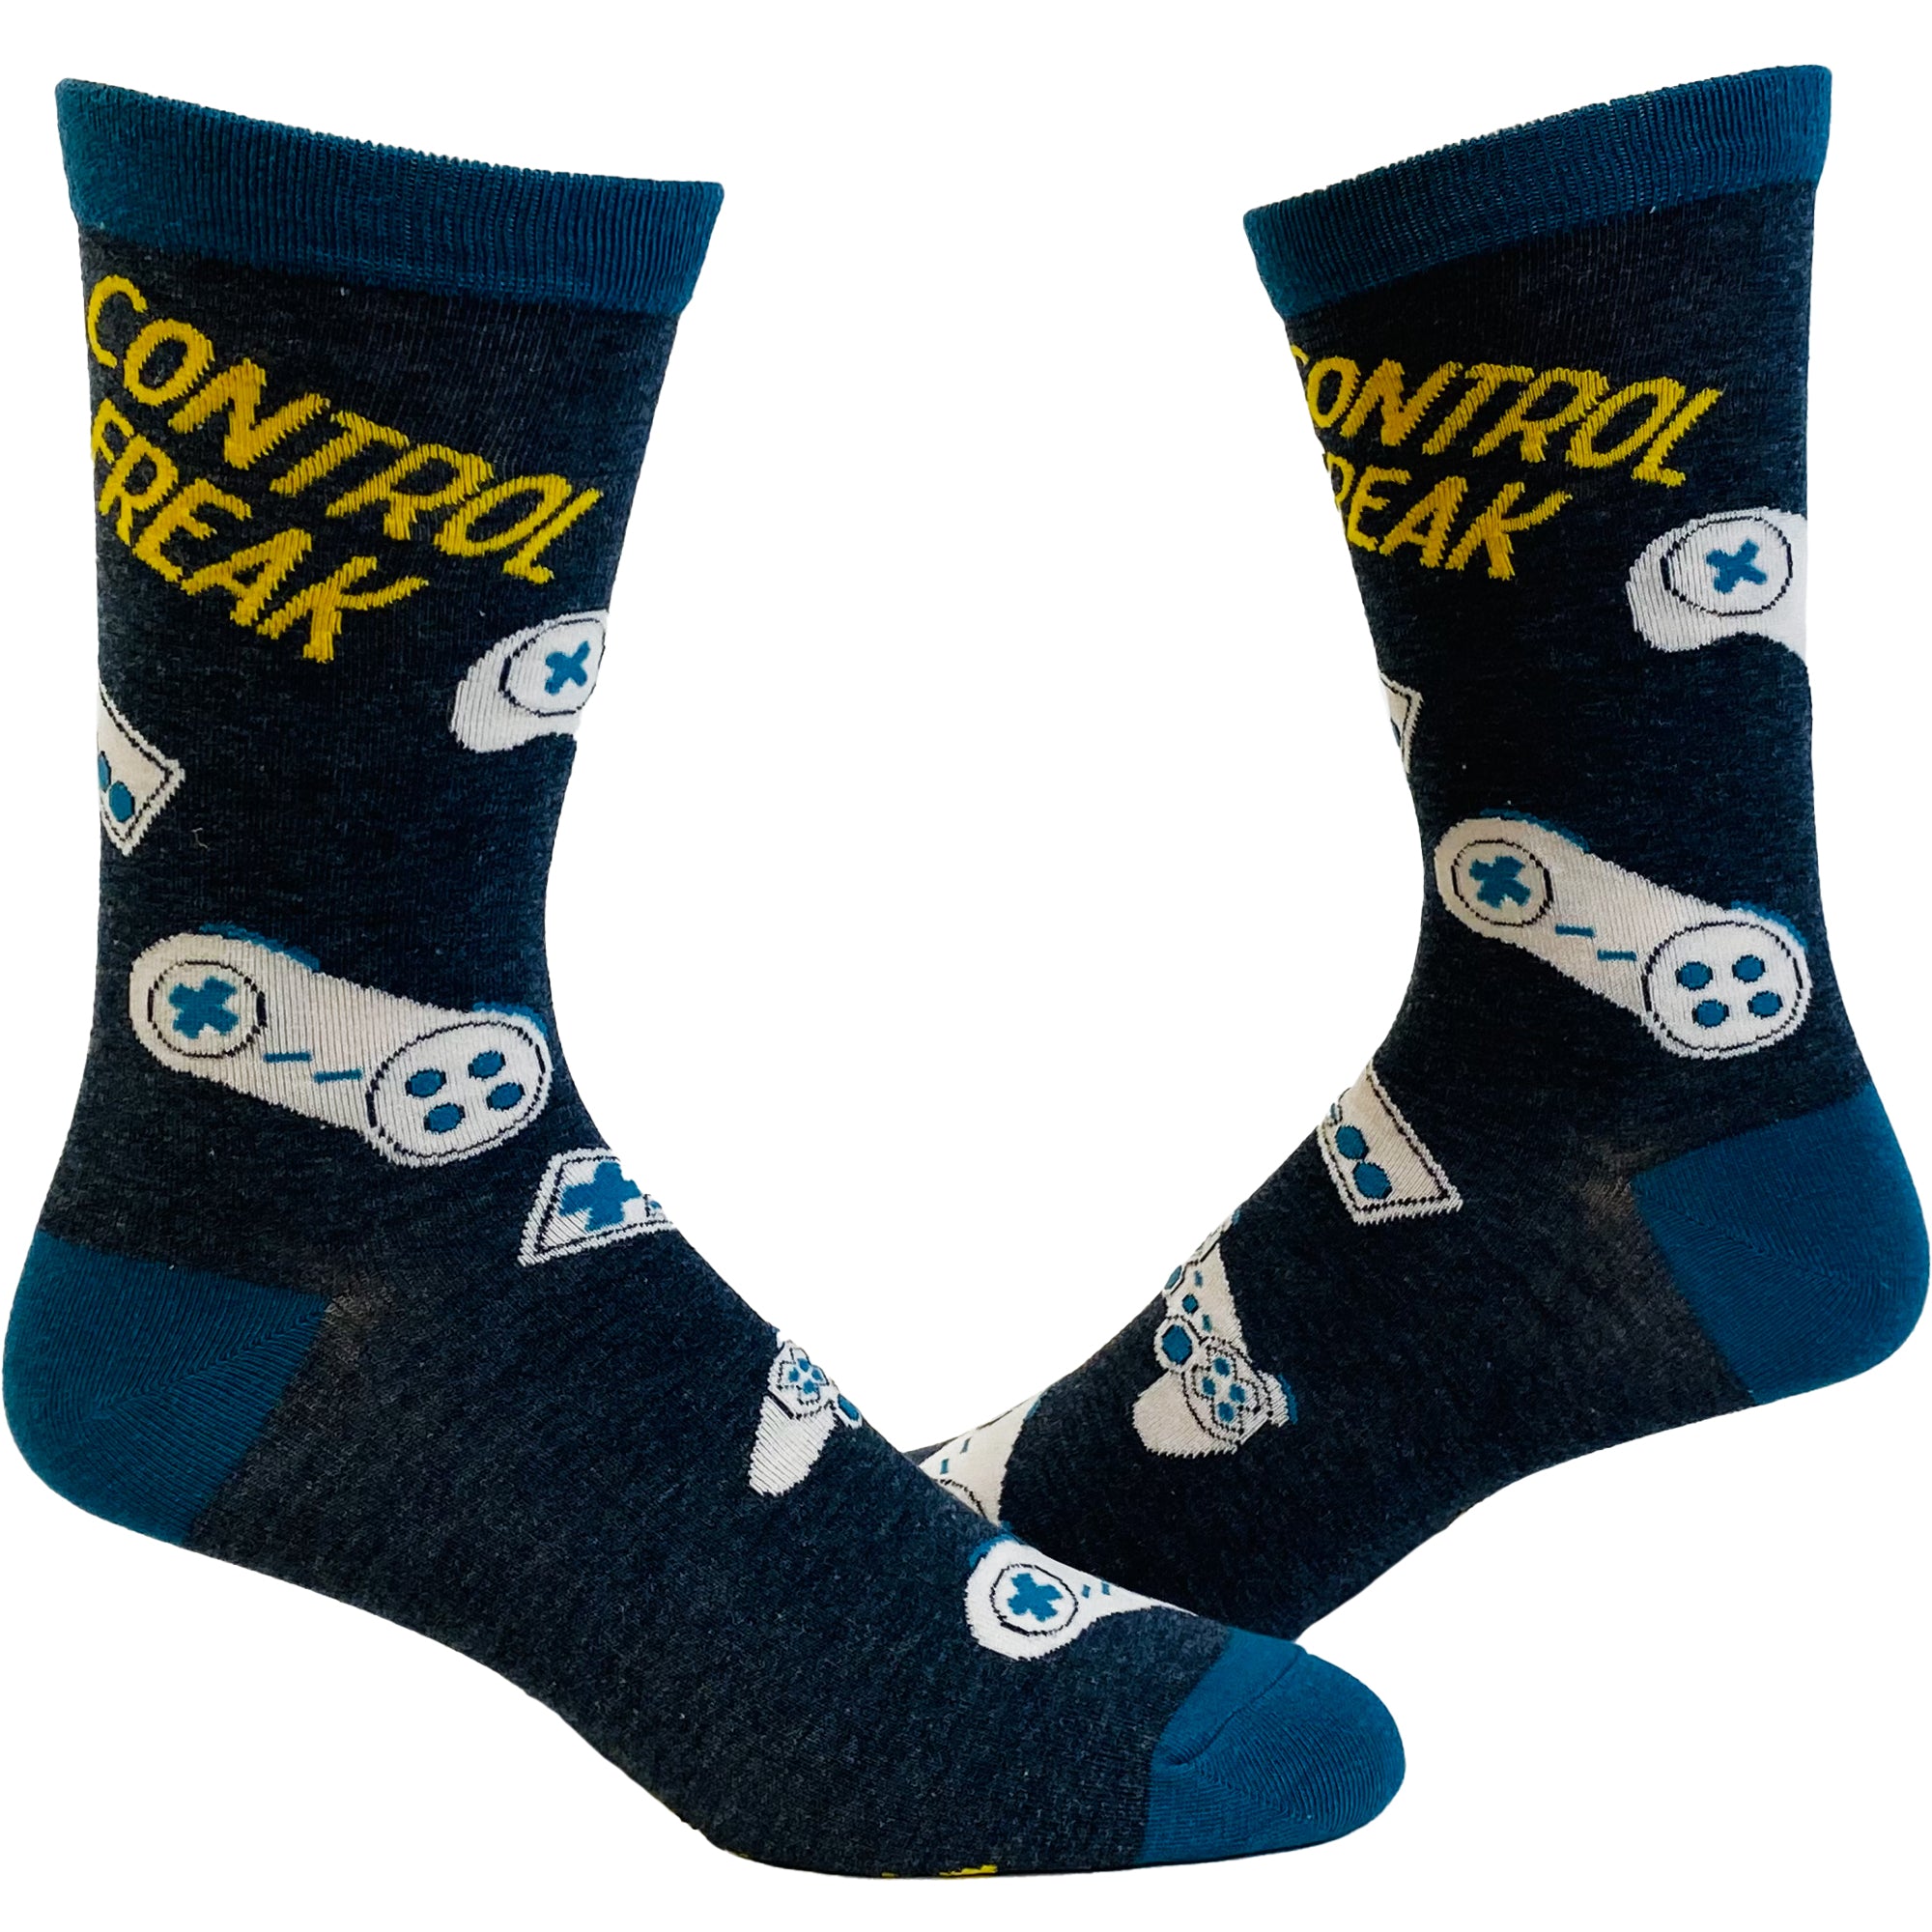 Funny Classically Trained Funny Gaming Sock Nerdy Video Games Retro Tee